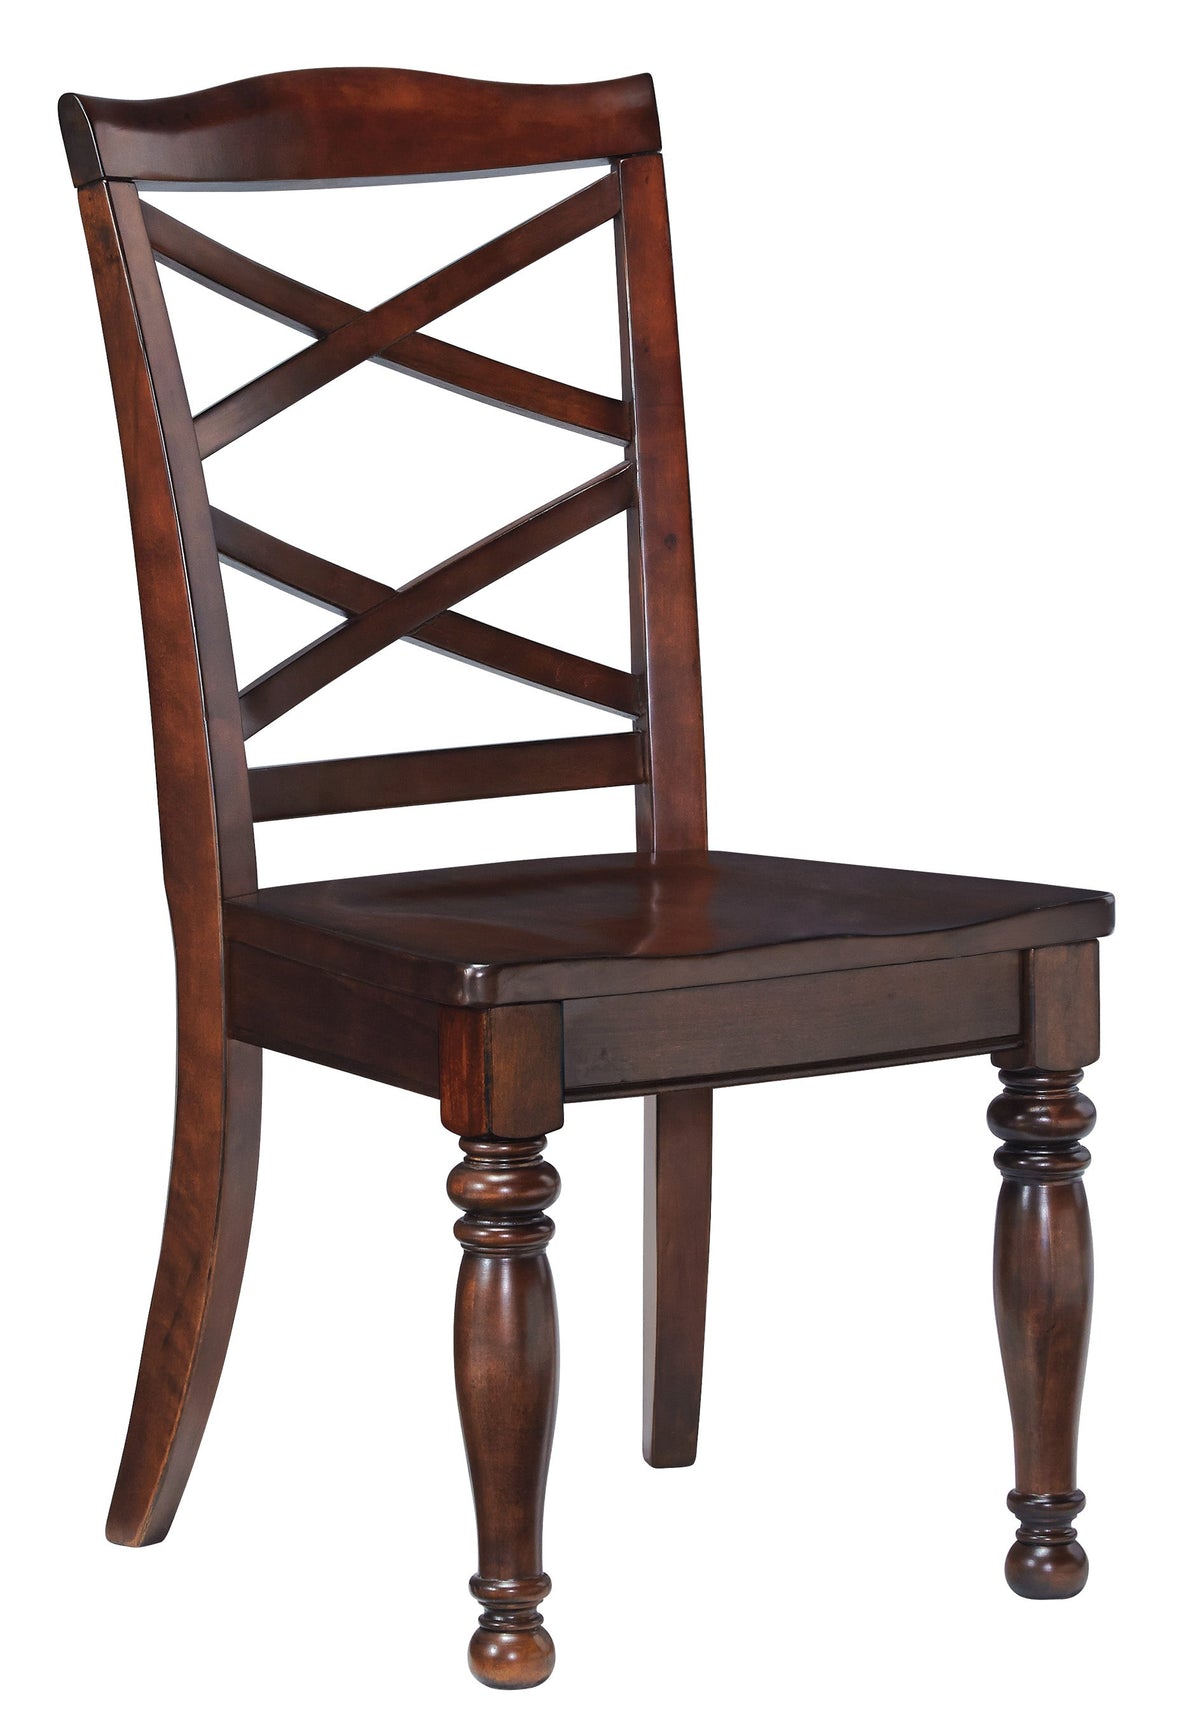 Porter Dining Chair